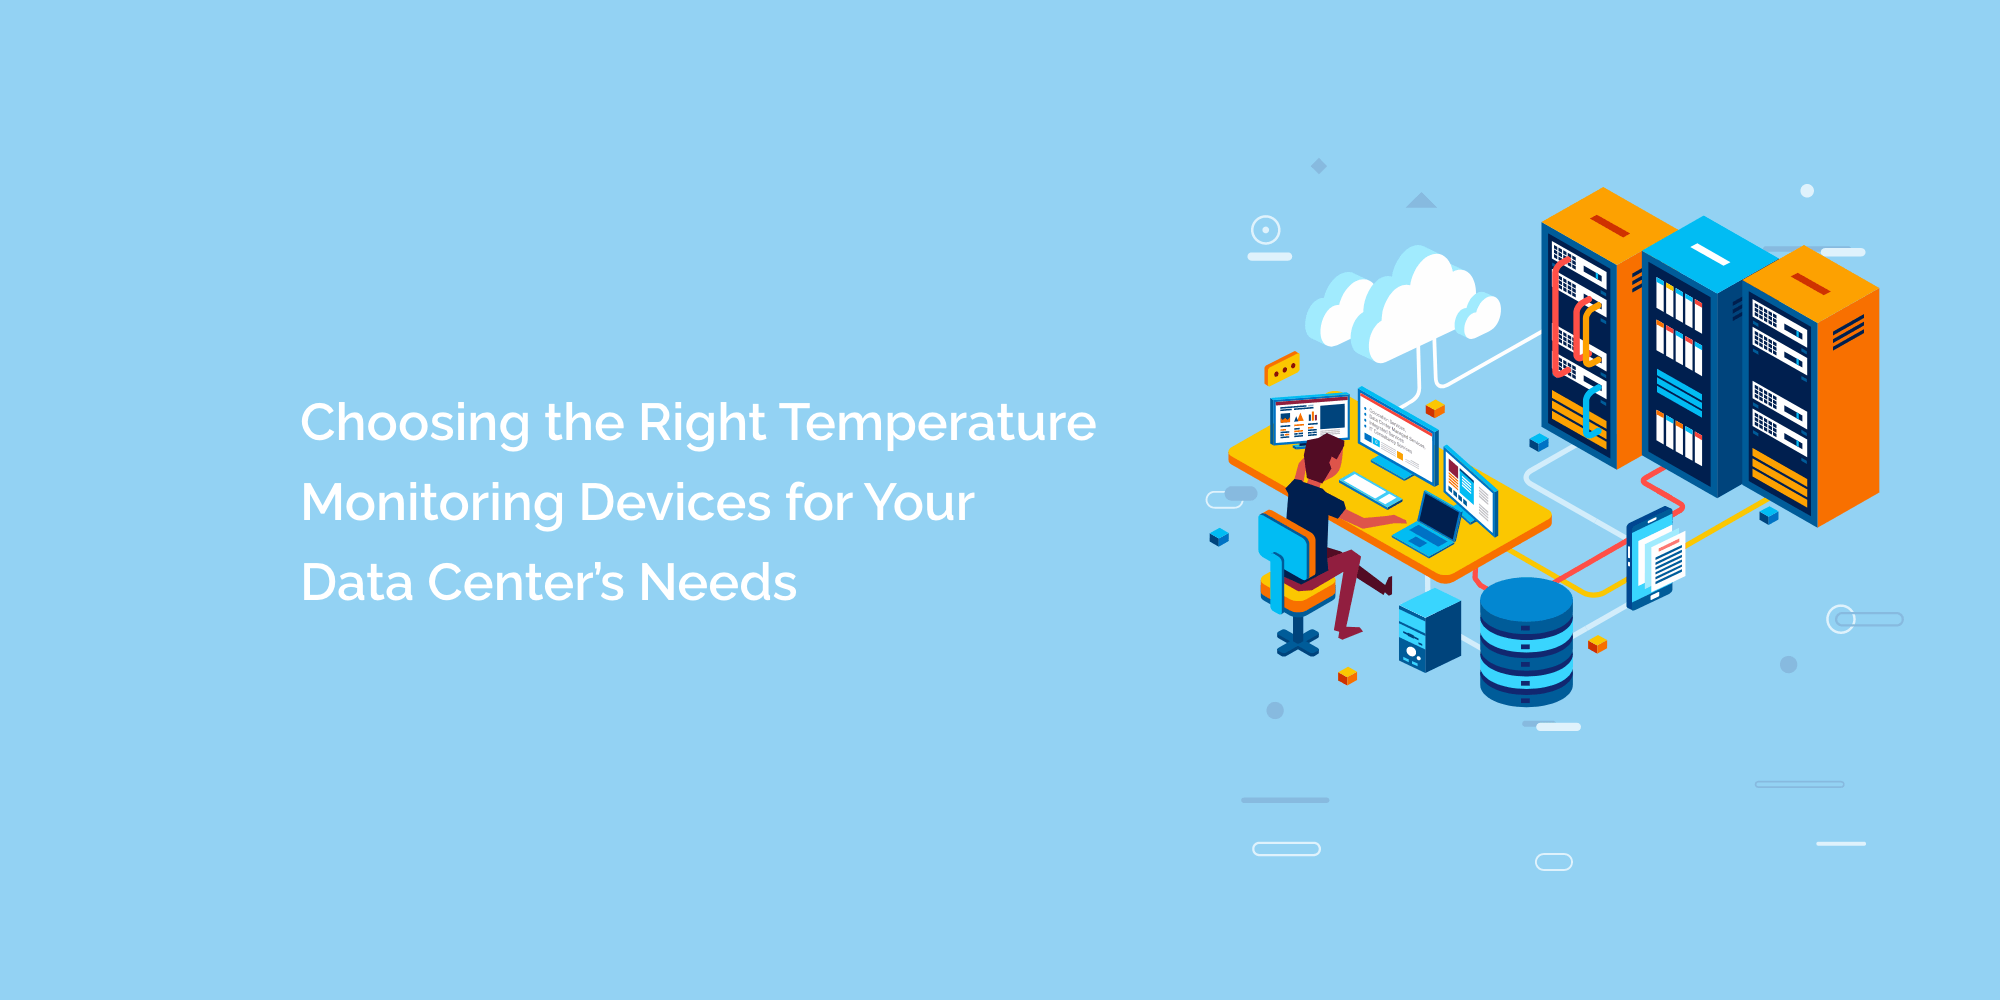 Choosing the Right Temperature Monitoring Devices for Your Data Center's Needs